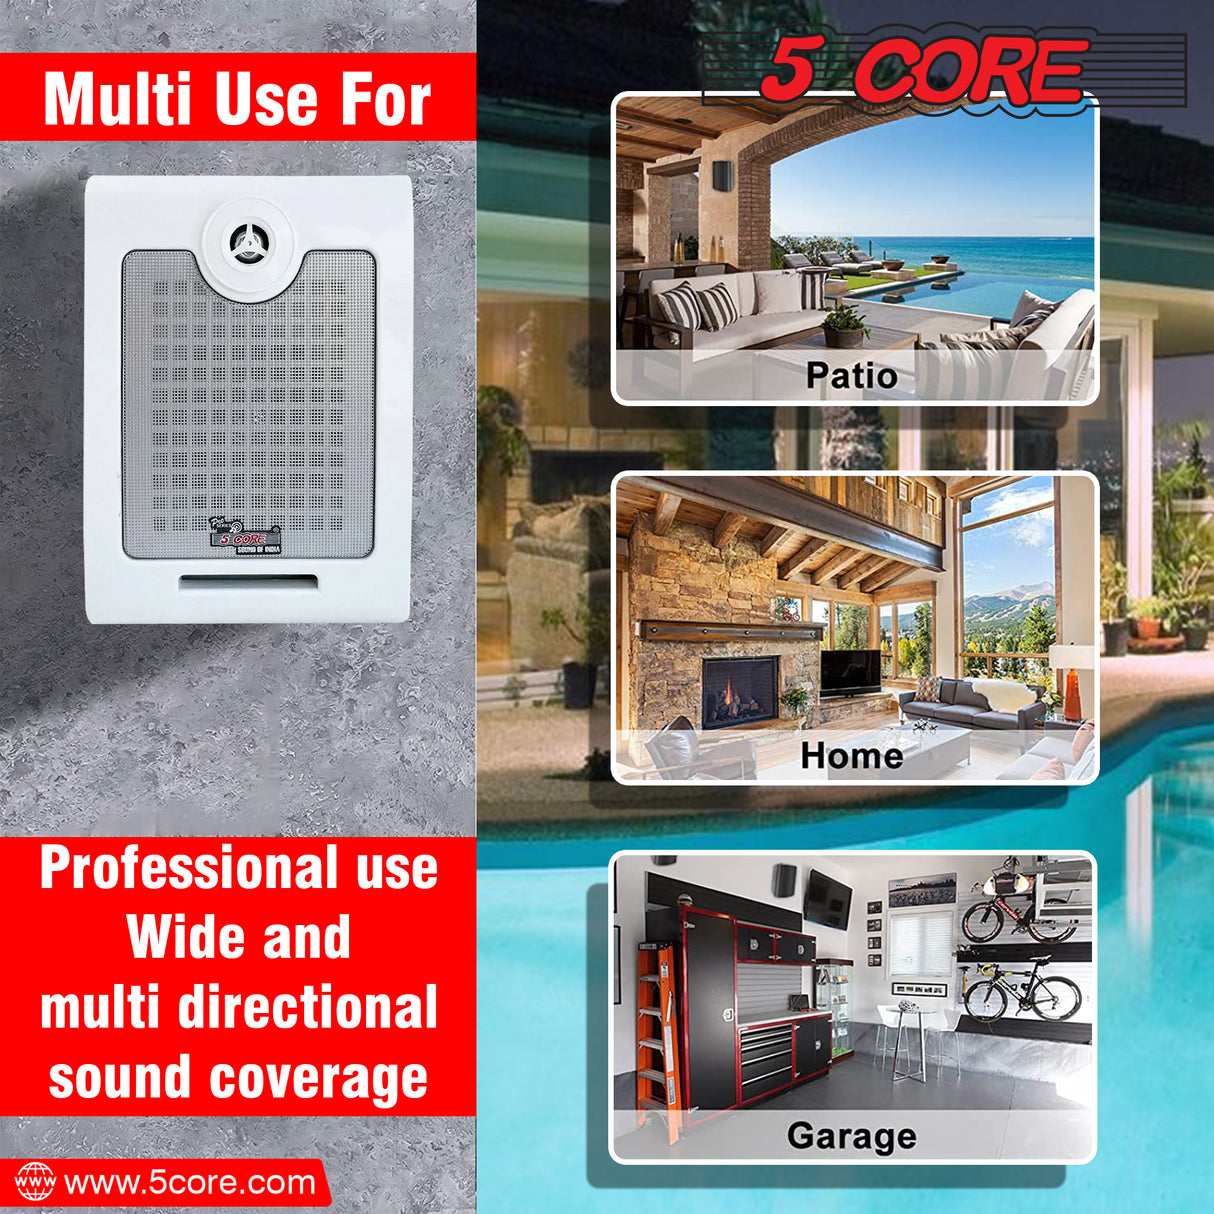 5 CORE 400W Outdoor Speaker Wired Waterproof System 2 Pieces Wall Mounted Indoor Outdoor Patio Backyard Surround Sound Home Exterior Window 2 PCS